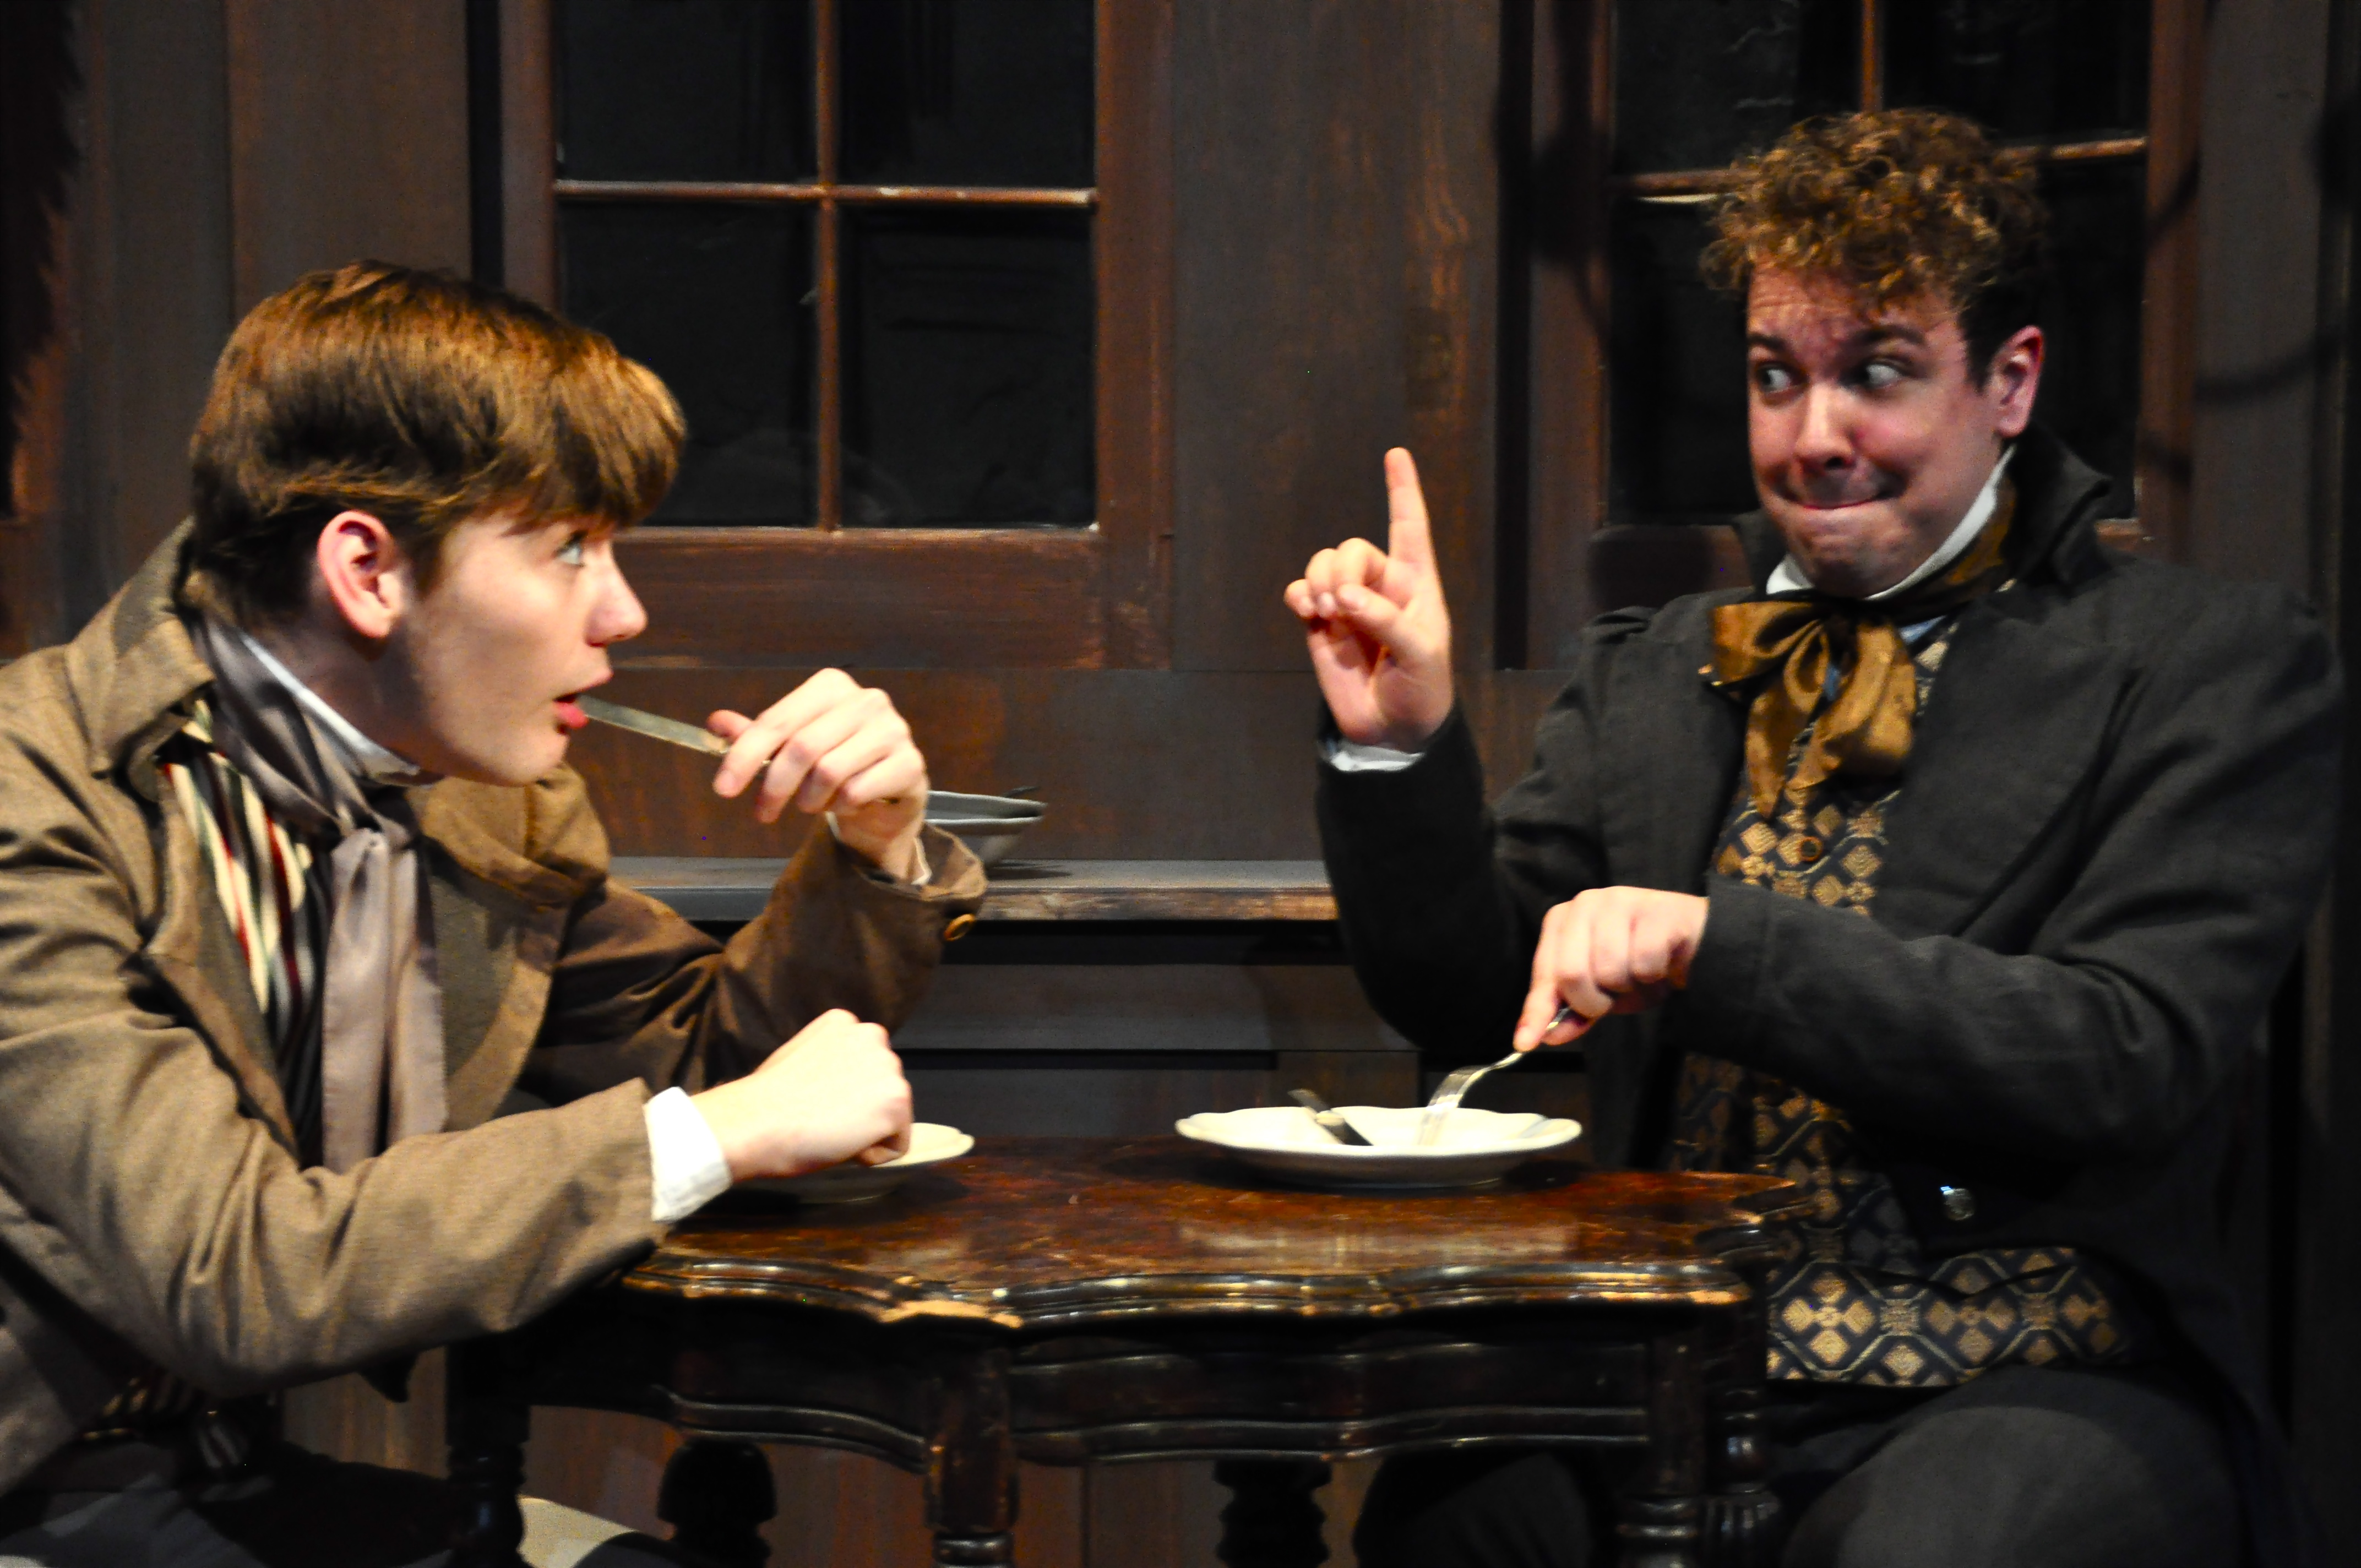 In PICT's "Great Expectations," young Pip (Dylan Marquis Meyers, L) learns gentlemanly table manners from Herbert Pocket (Jordan Ross Weinhold). Photo: Suellen Fitzsimmons.